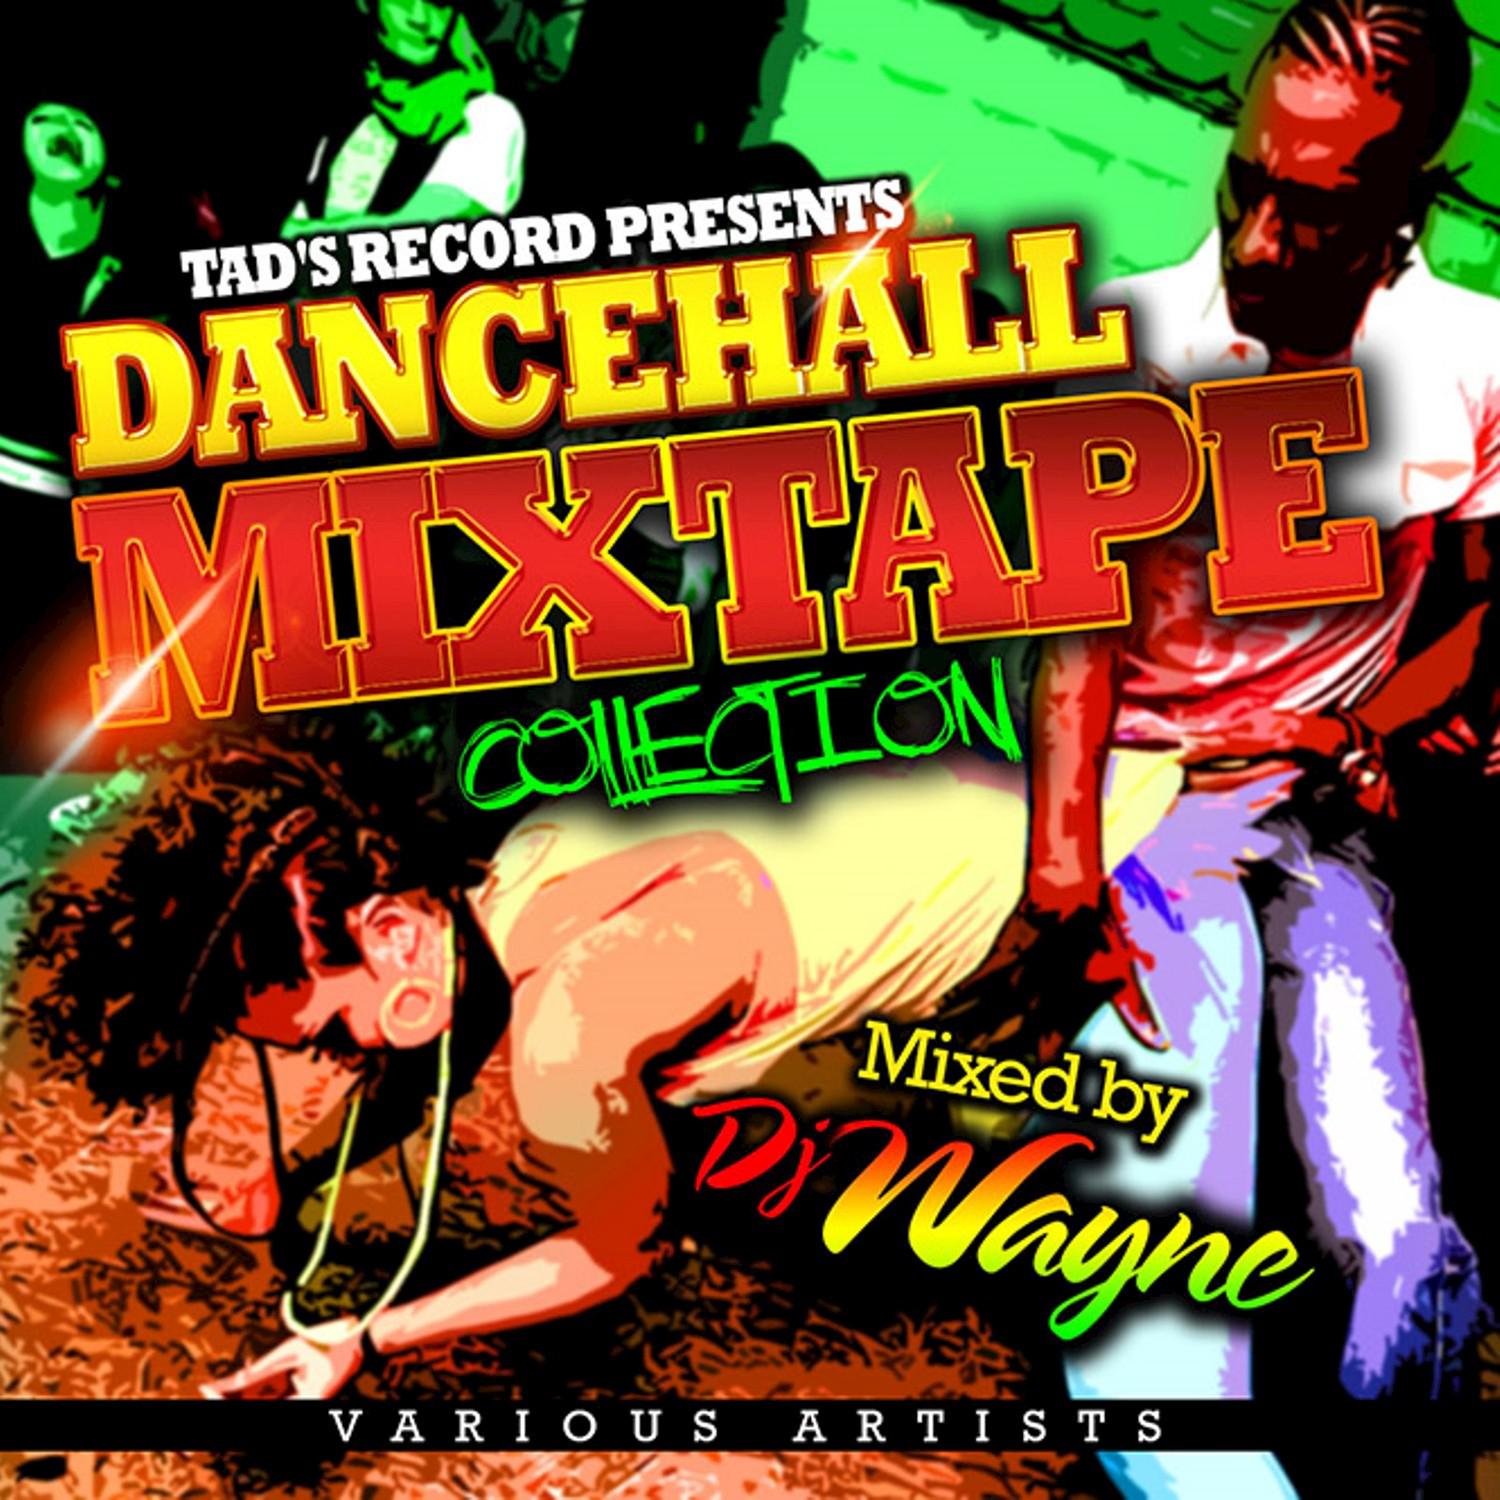 Tad's Record Presents: Dancehall Mix Tape Collection (Mixed By DJ Wayne)